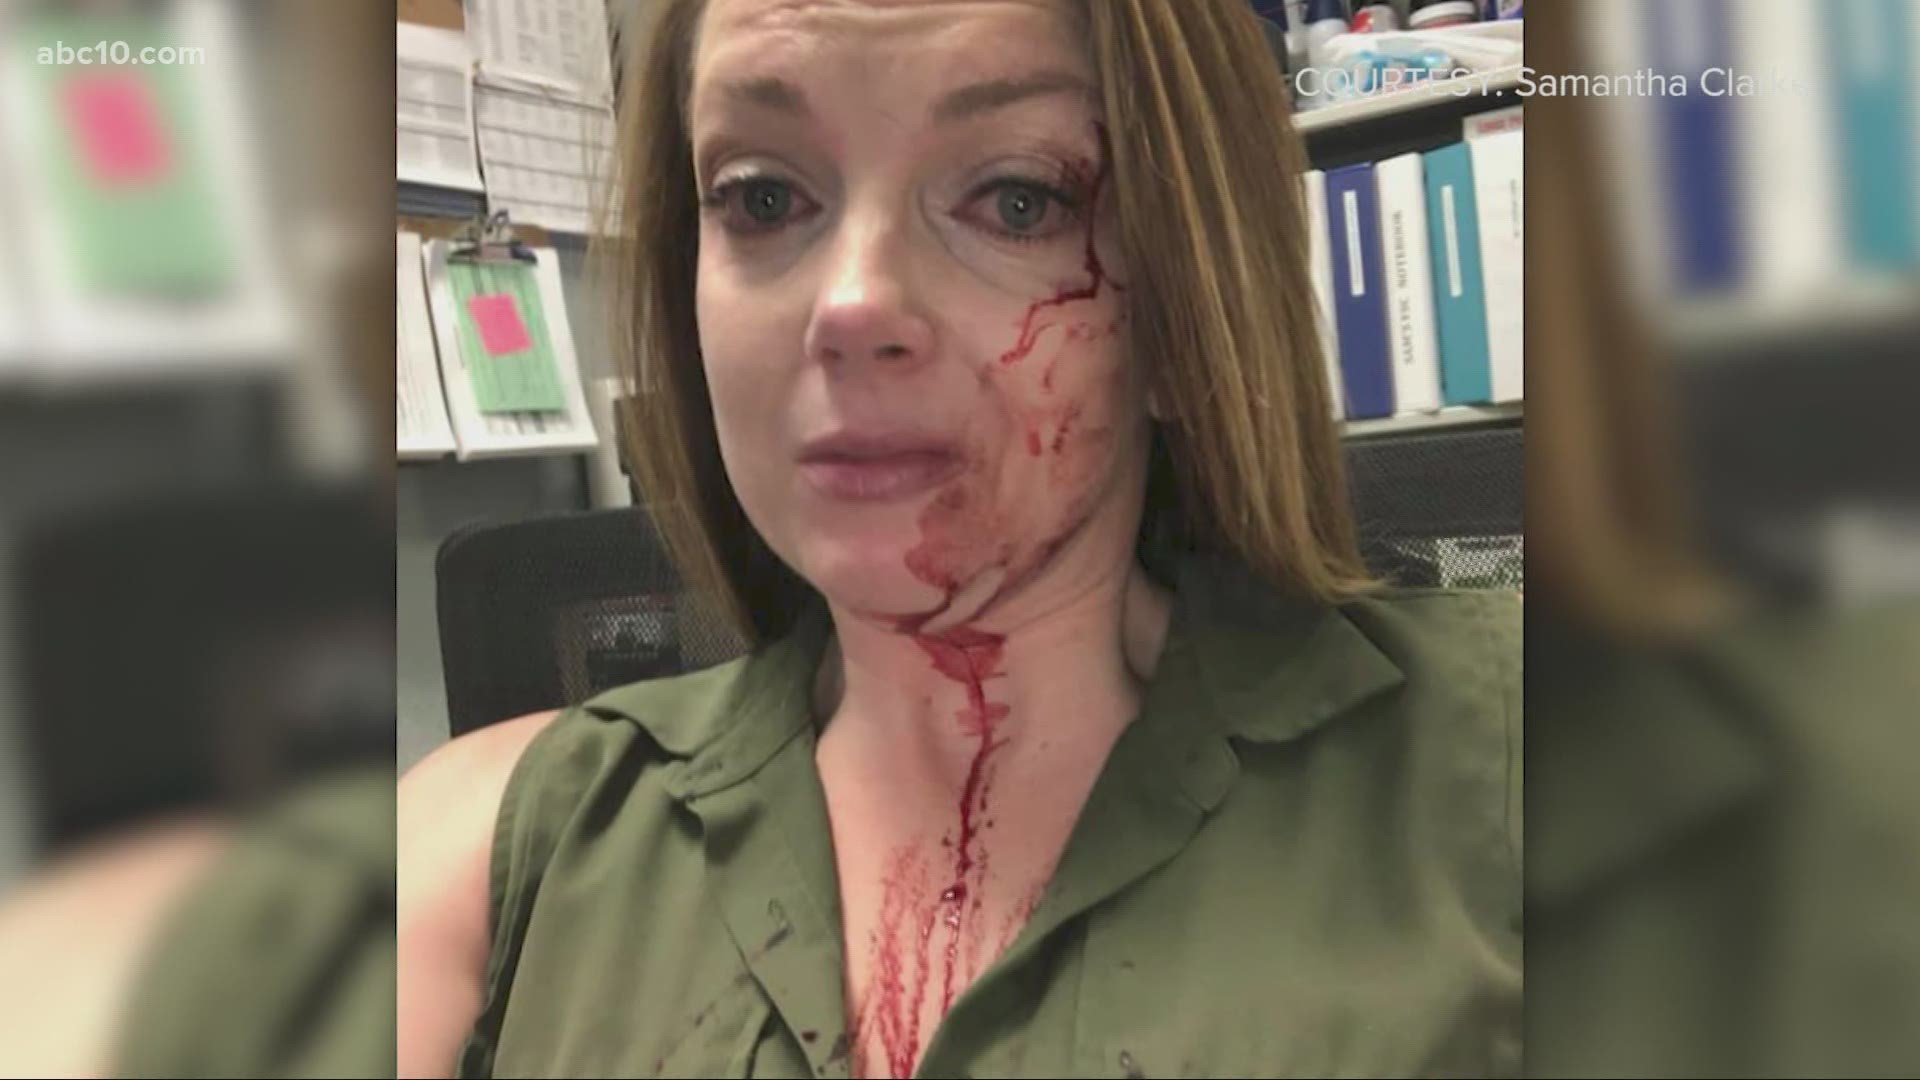 Samantha Clarke said she was "split open pretty good" two weeks ago when she was allegedly assaulted by a customer while working at a Big 5 Sporting Goods store.